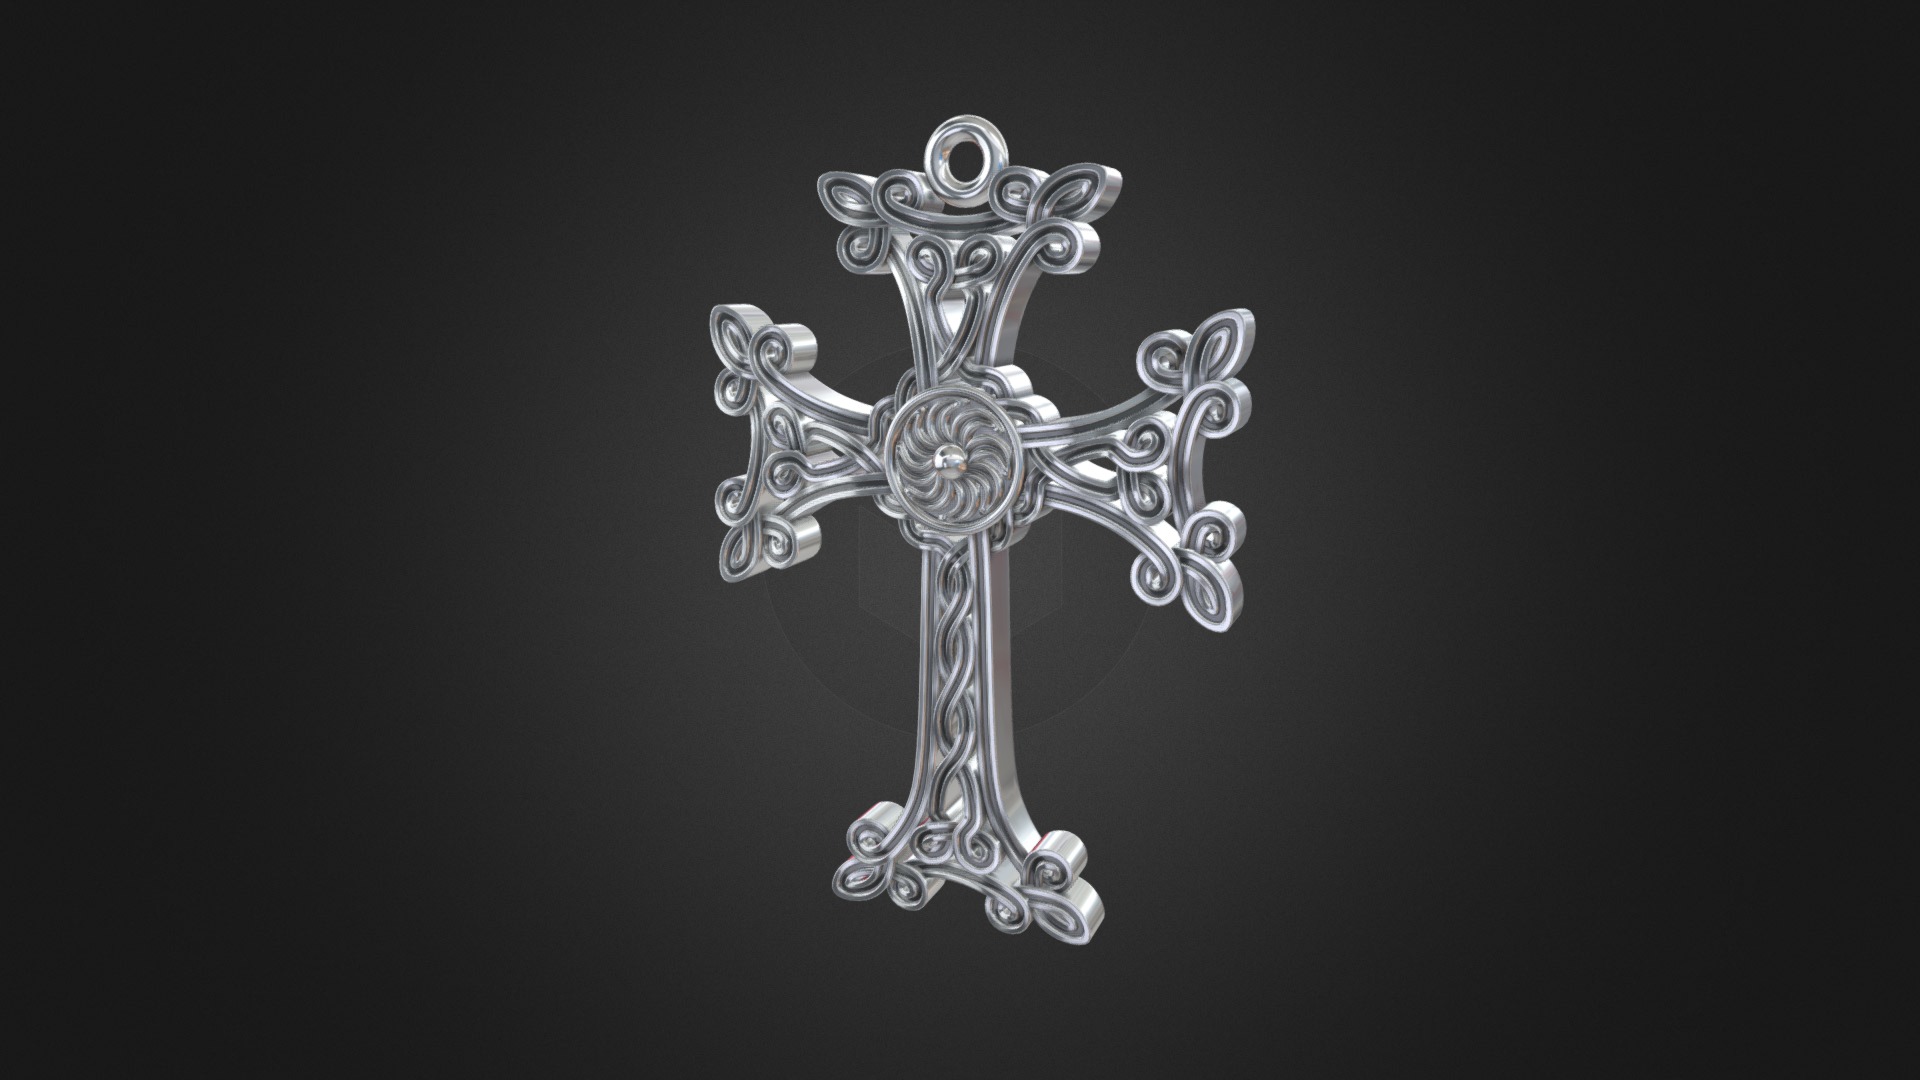 3D model 1042 – Cross - This is a 3D model of the 1042 - Cross. The 3D model is about a gold and silver cross.